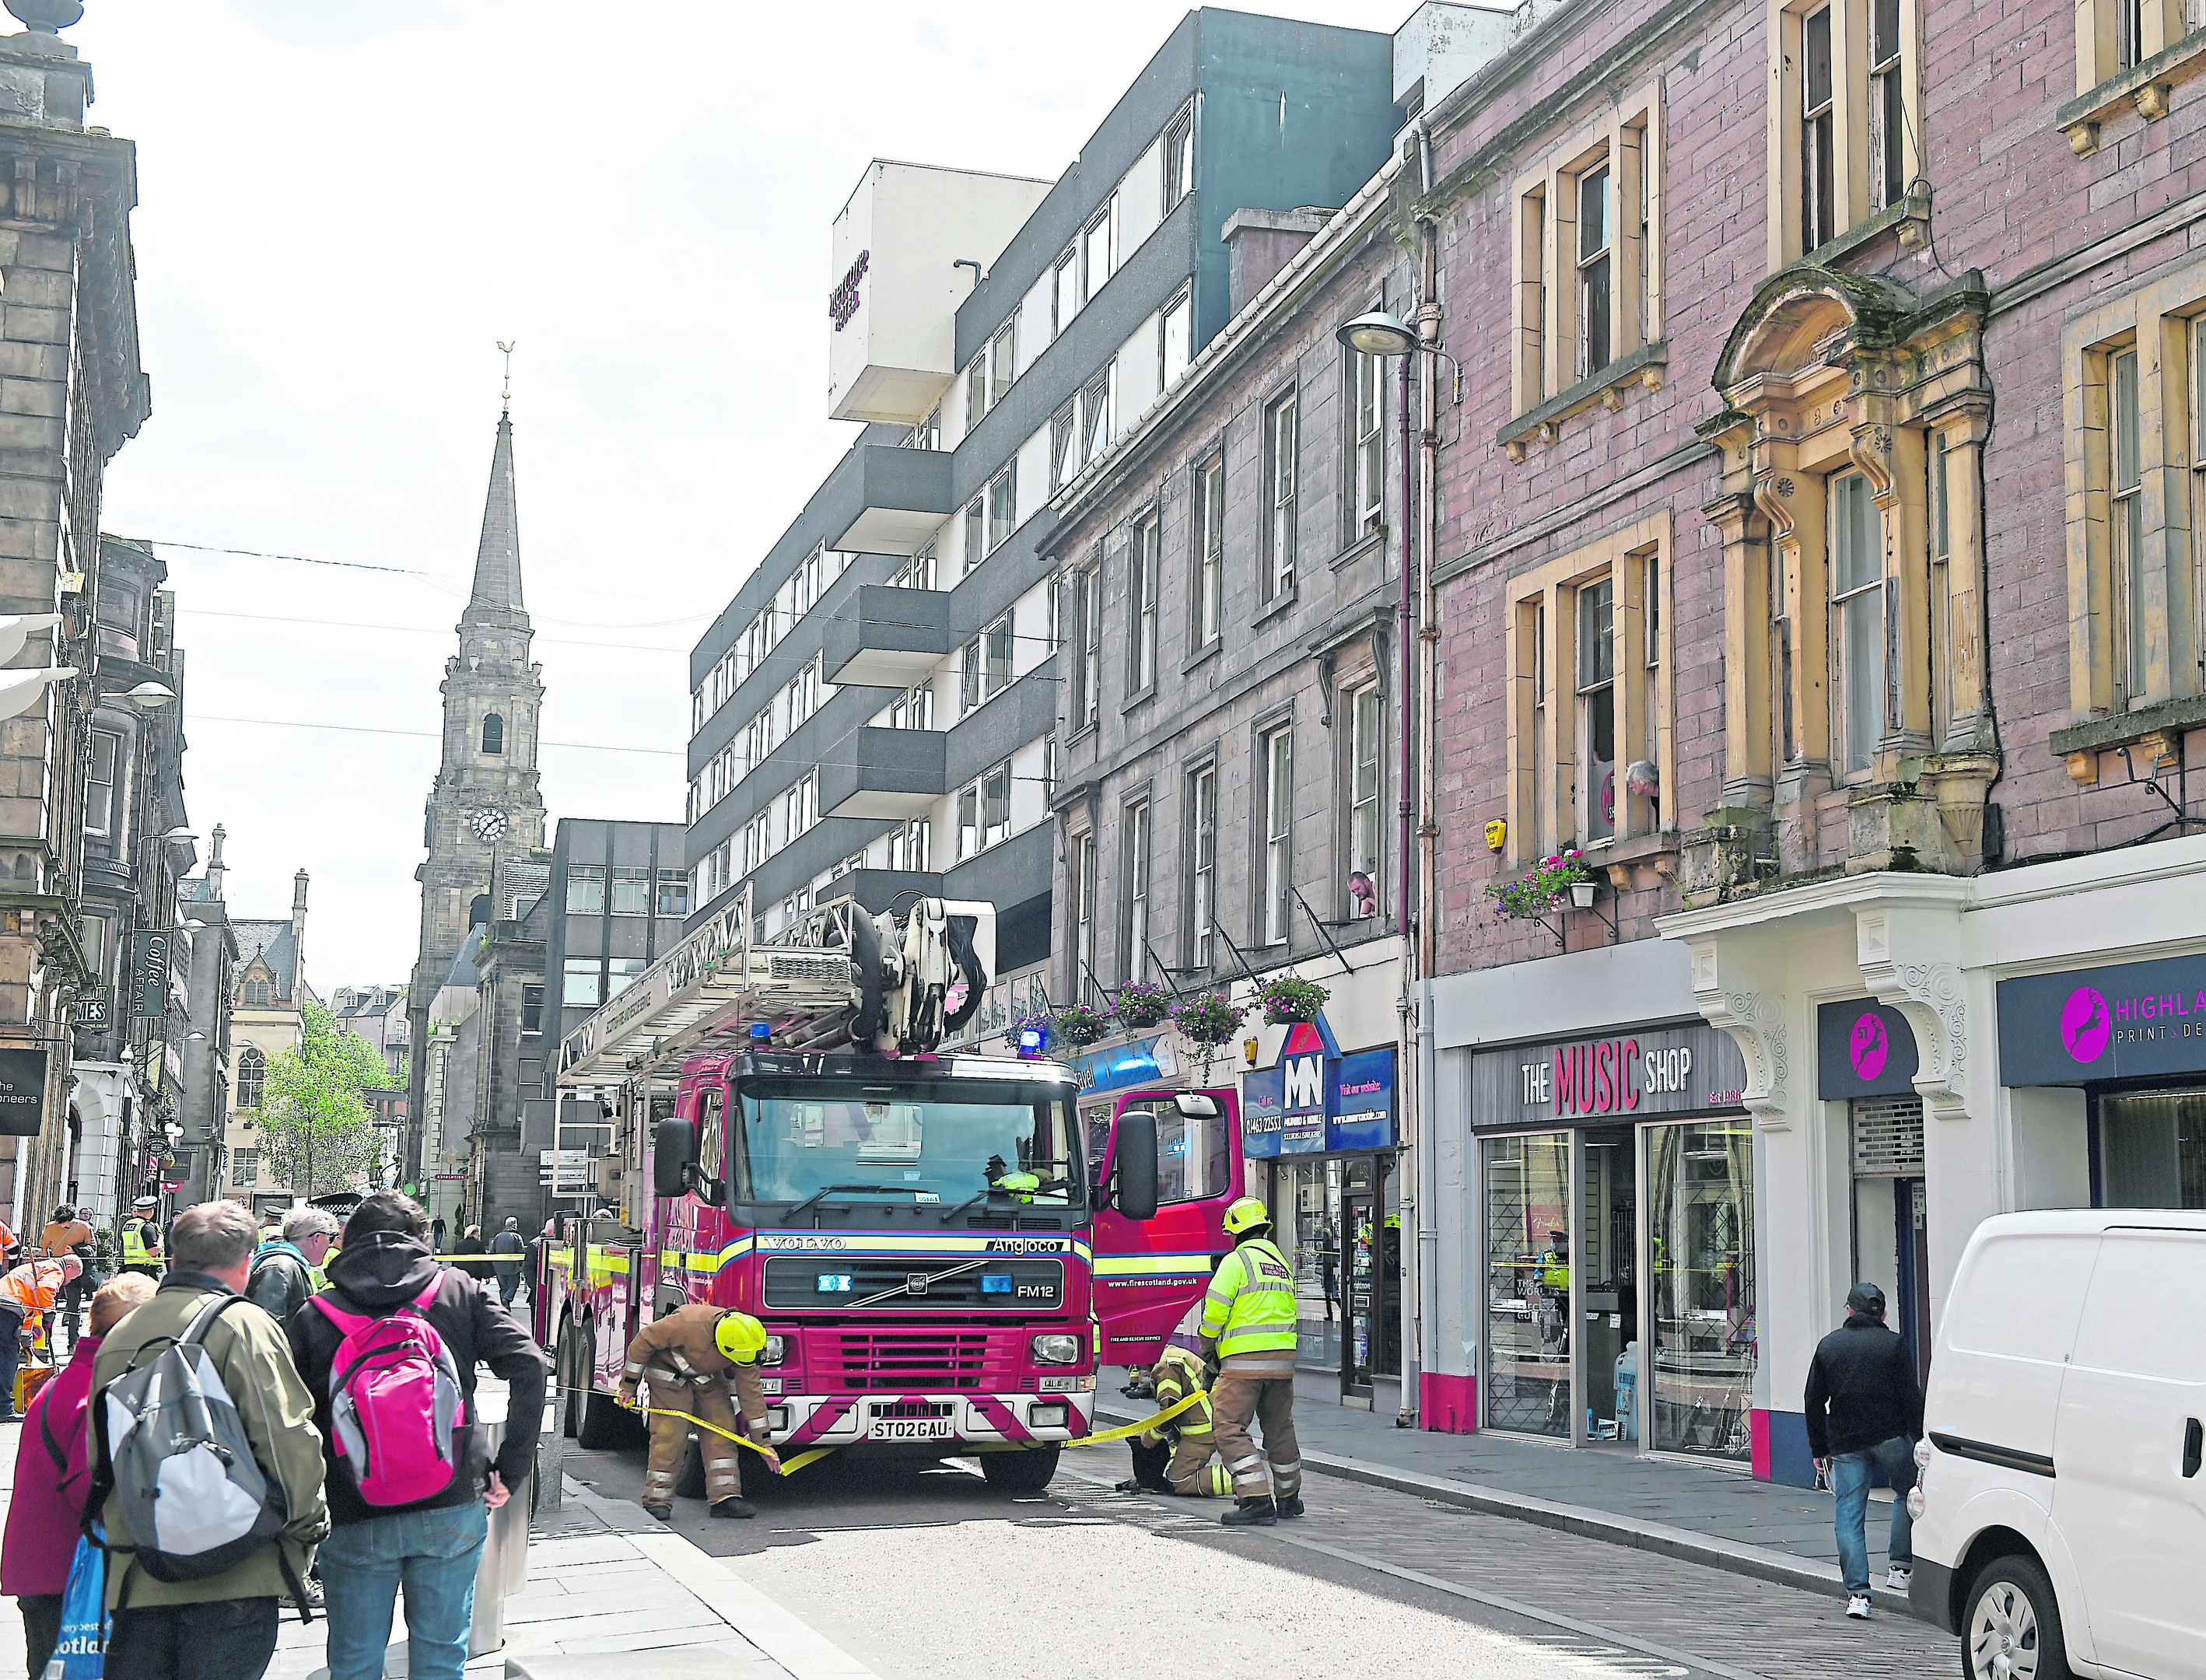 A roof hatch blew off a building in Church Street, Inverness striking two tourists as it fell in June 2017.